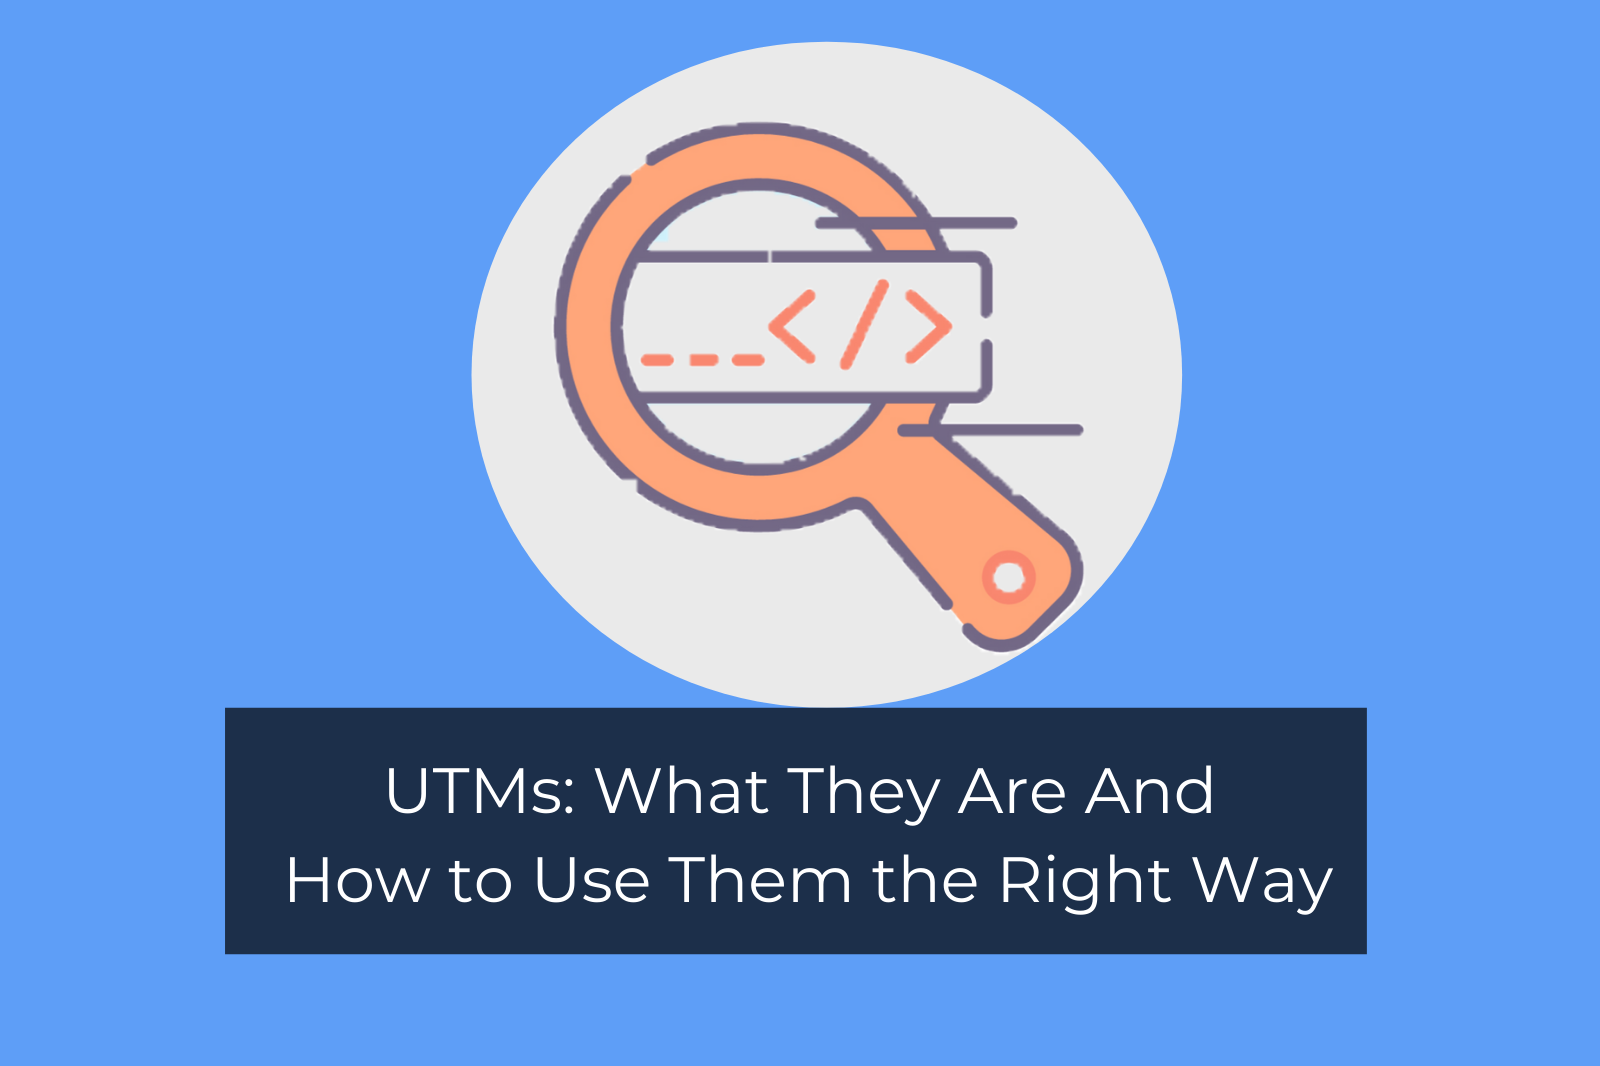 UTMs: What They Are And How to Use Them the Right Way